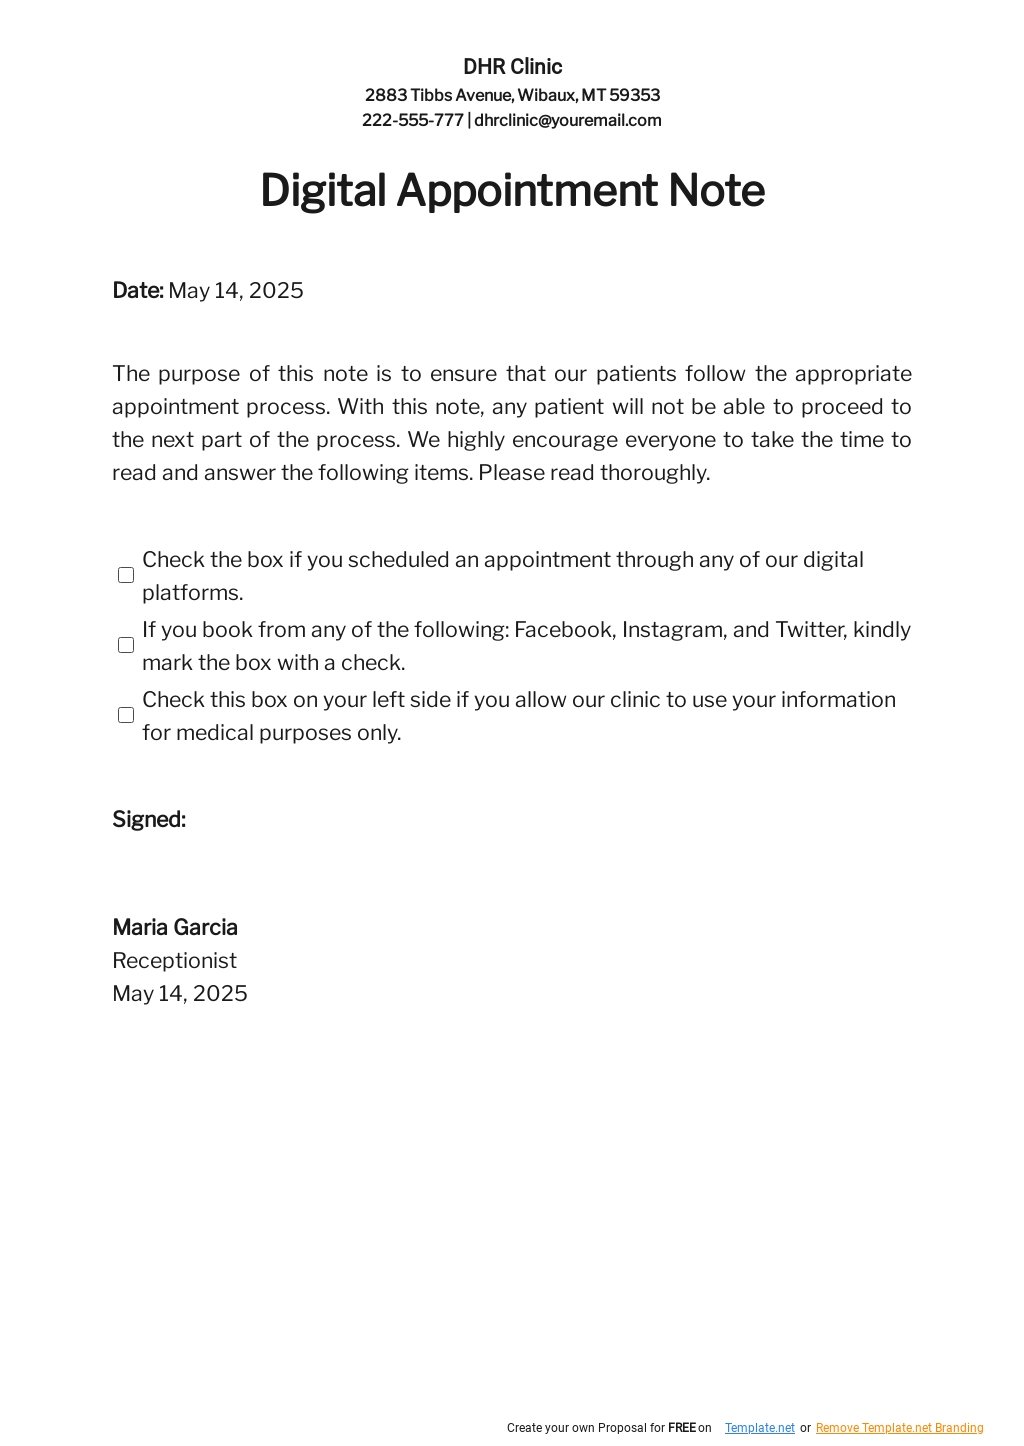 Digital Appointment Notes Template in Word, Google Docs, Apple Pages